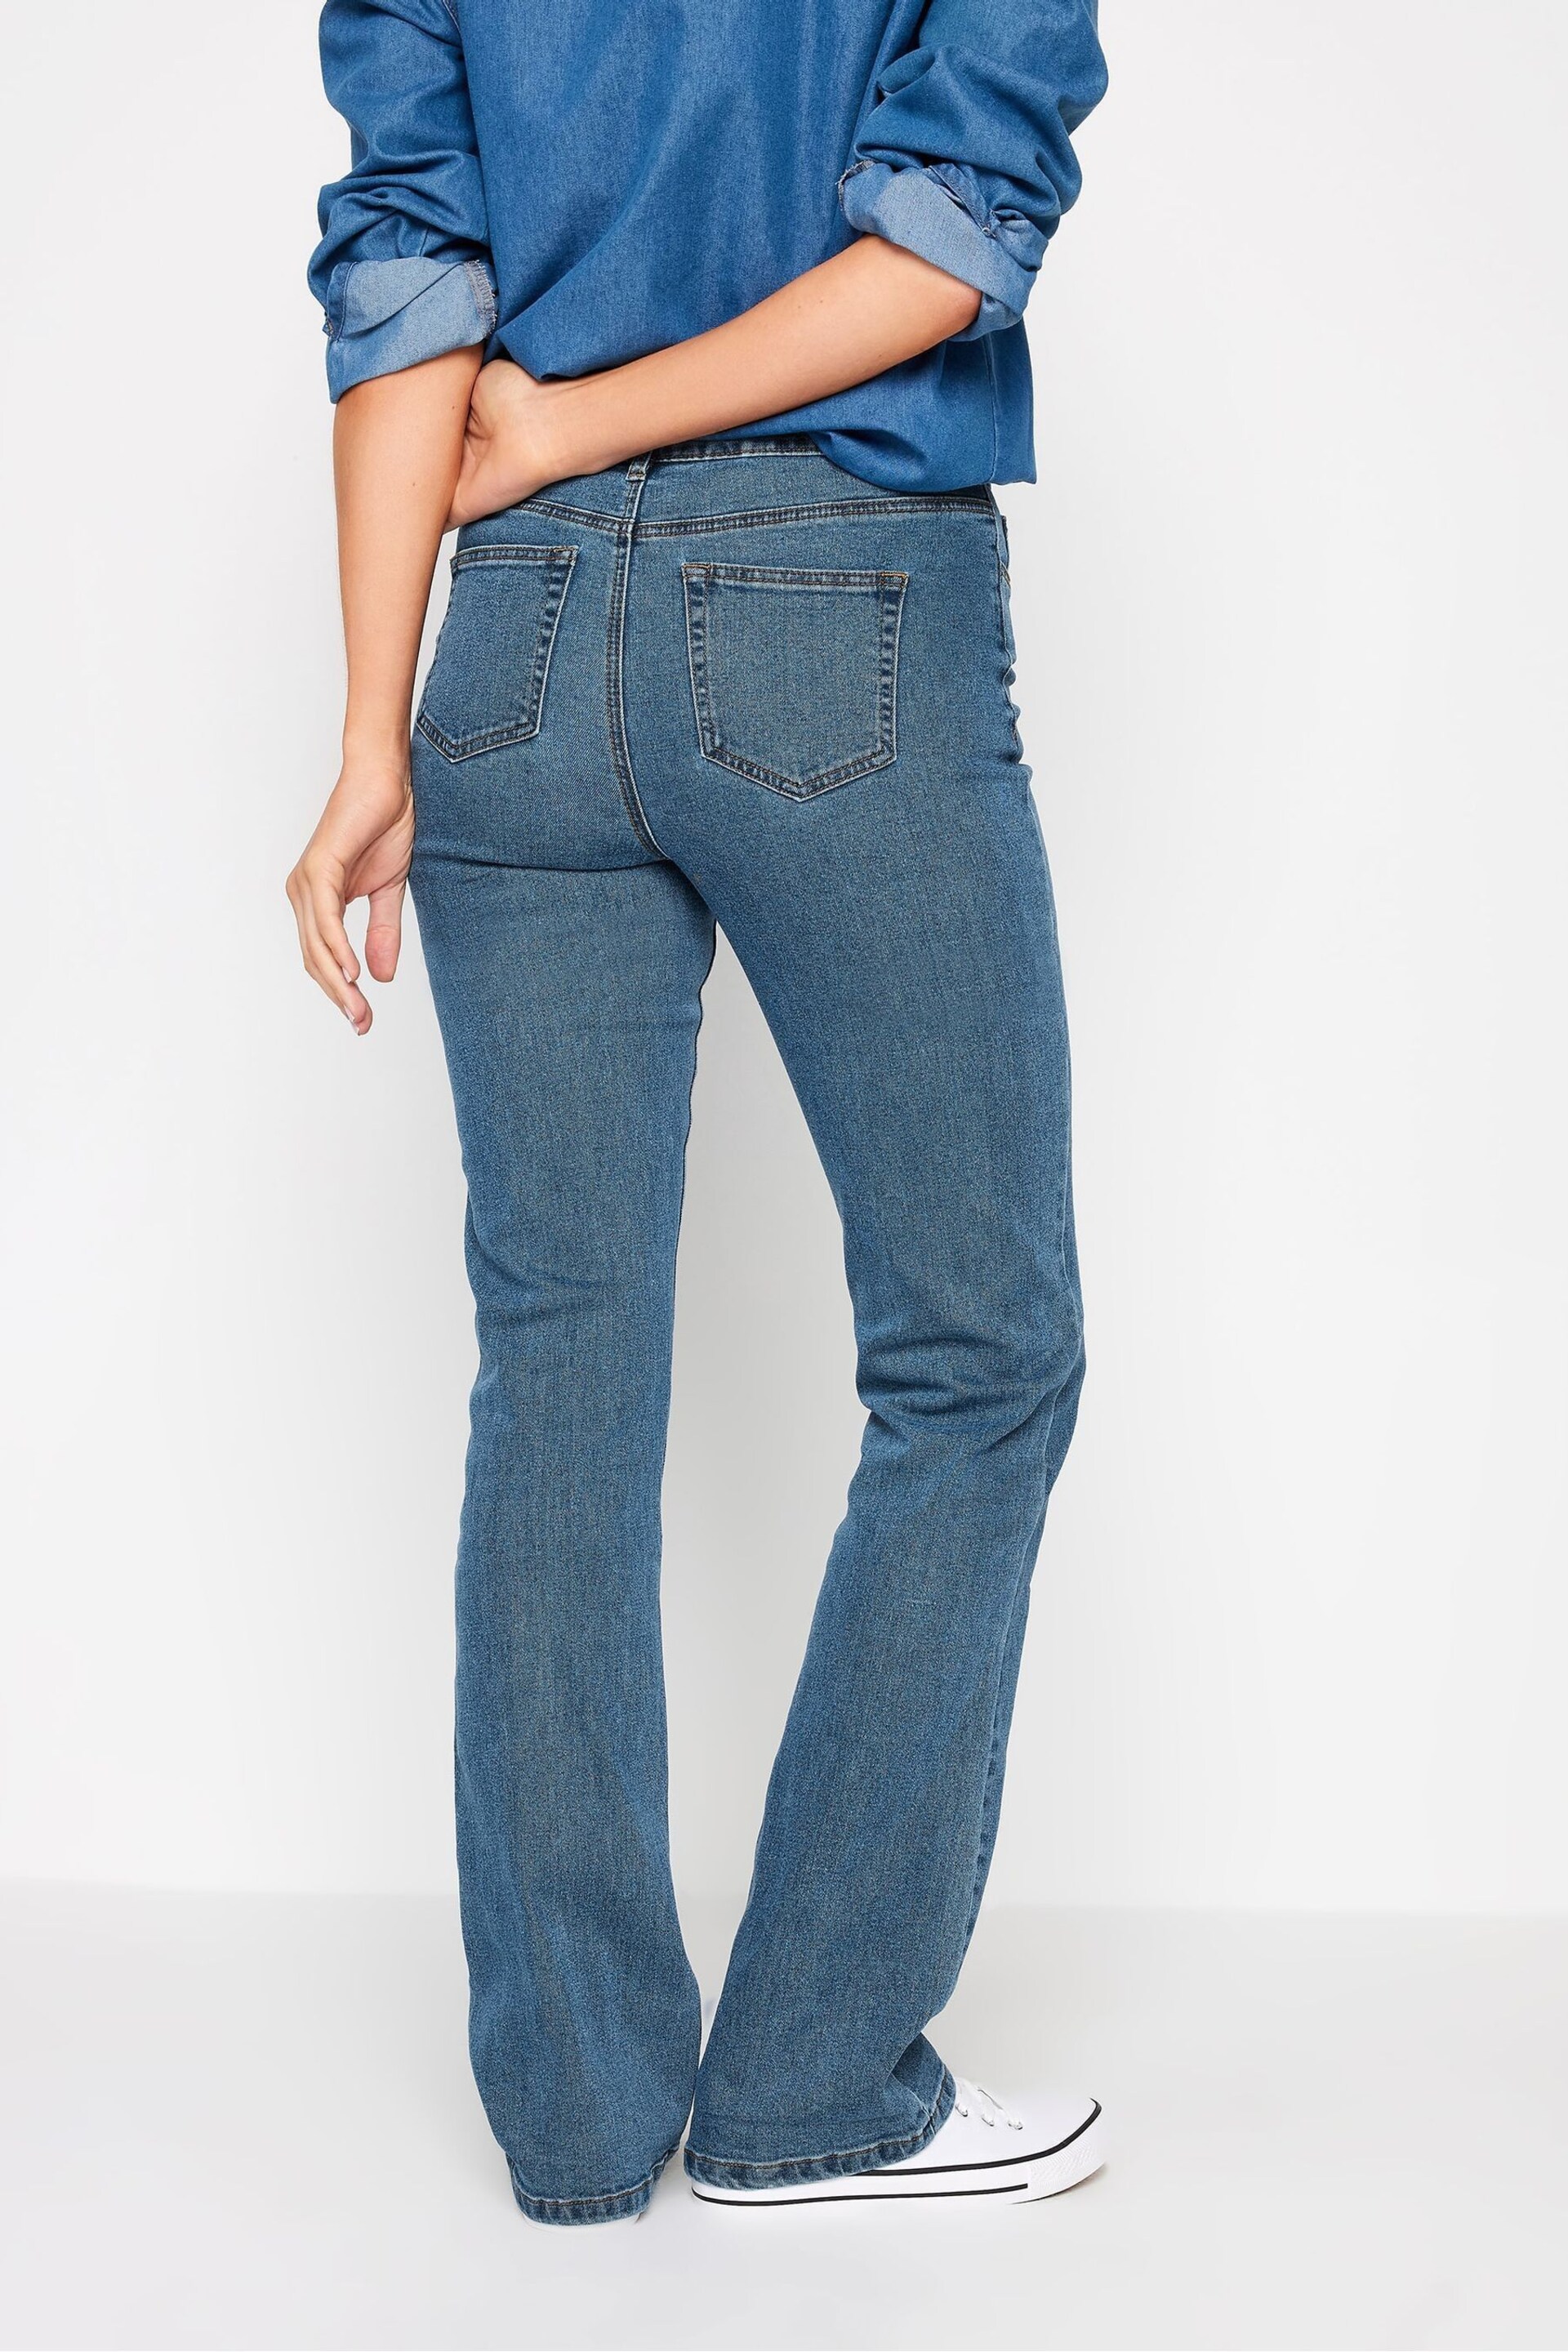 Long Tall Sally Blue Bootcut Jeans - Image 2 of 4